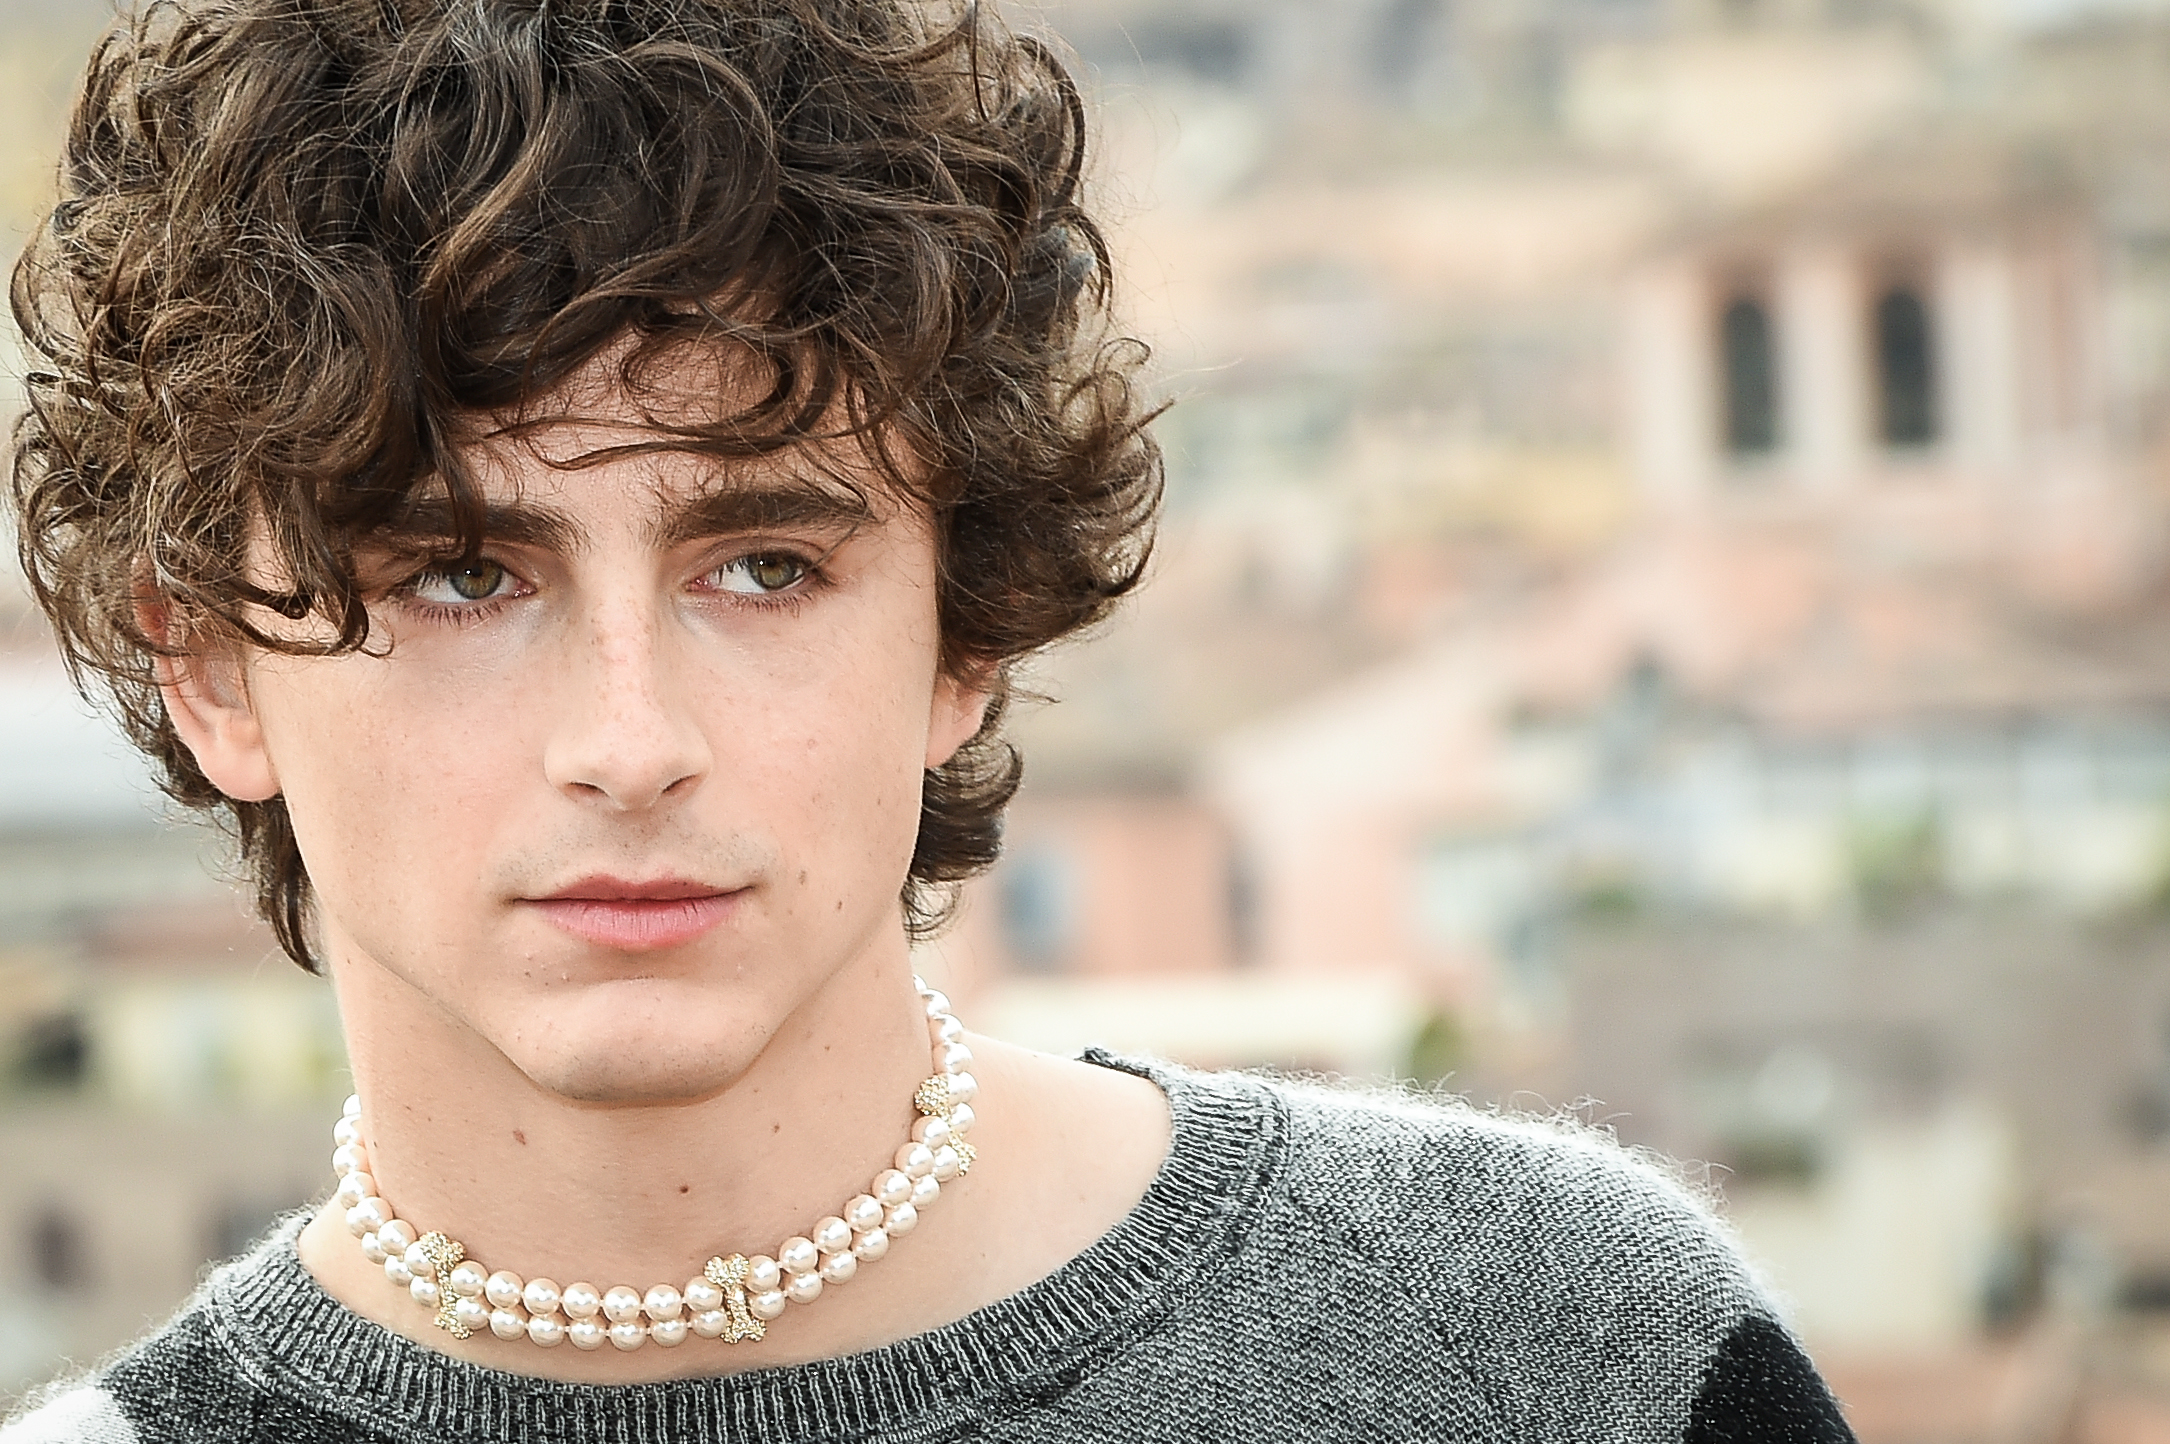 Timothee Chalamet says Wonka role will appeal him to younger audiences   Hollywood  Gulf News